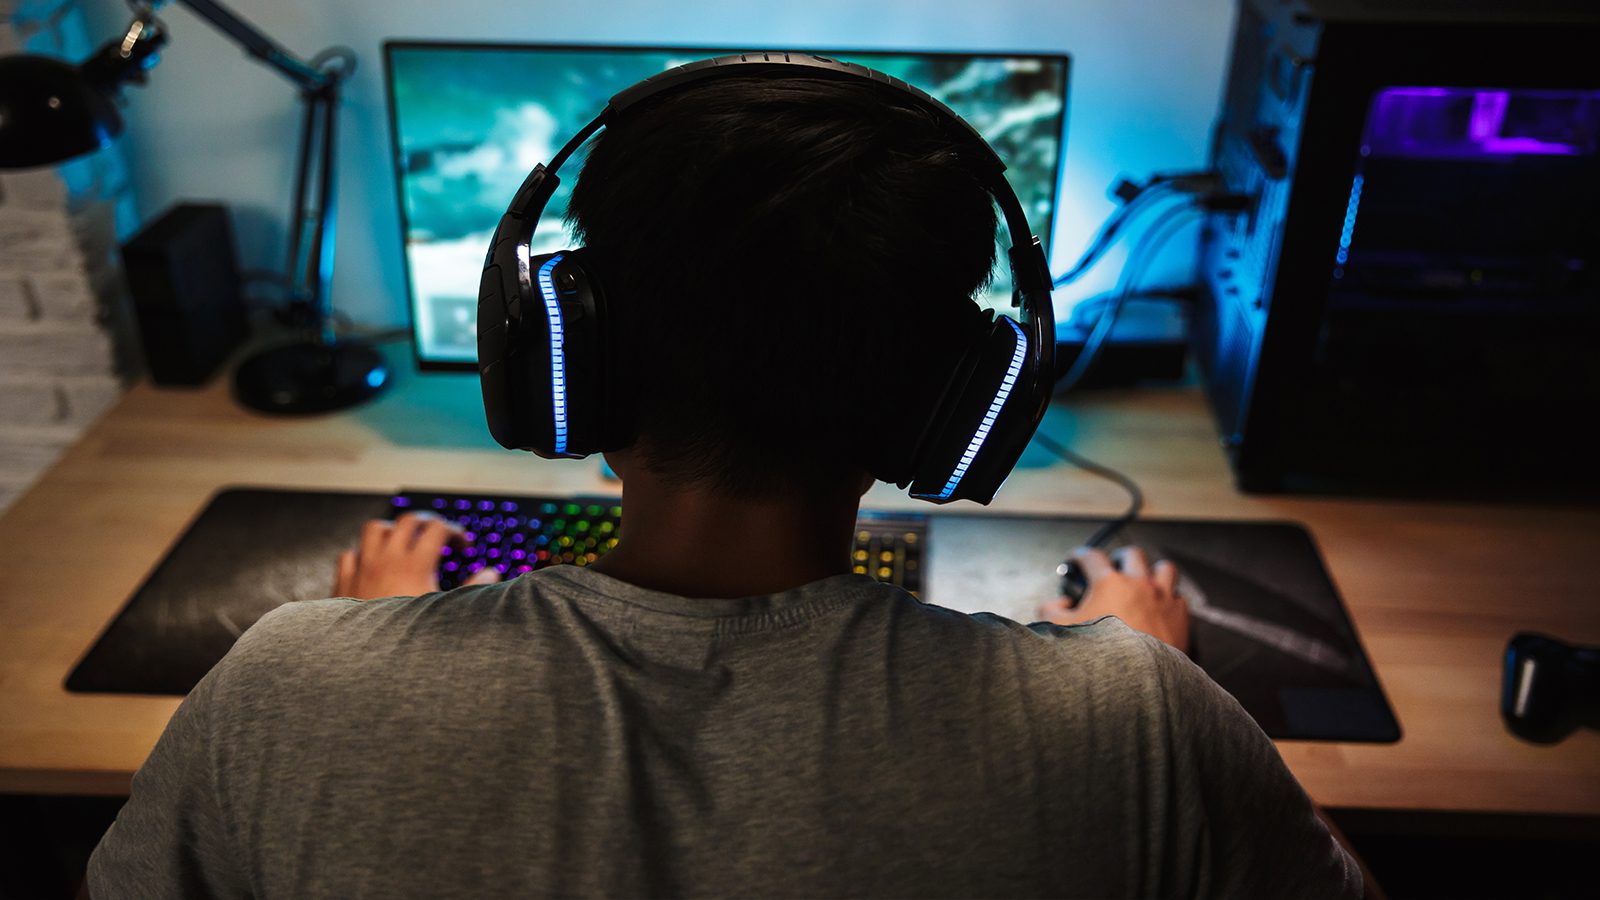 6 Things Every Avid Gamer Should Know About Sleep